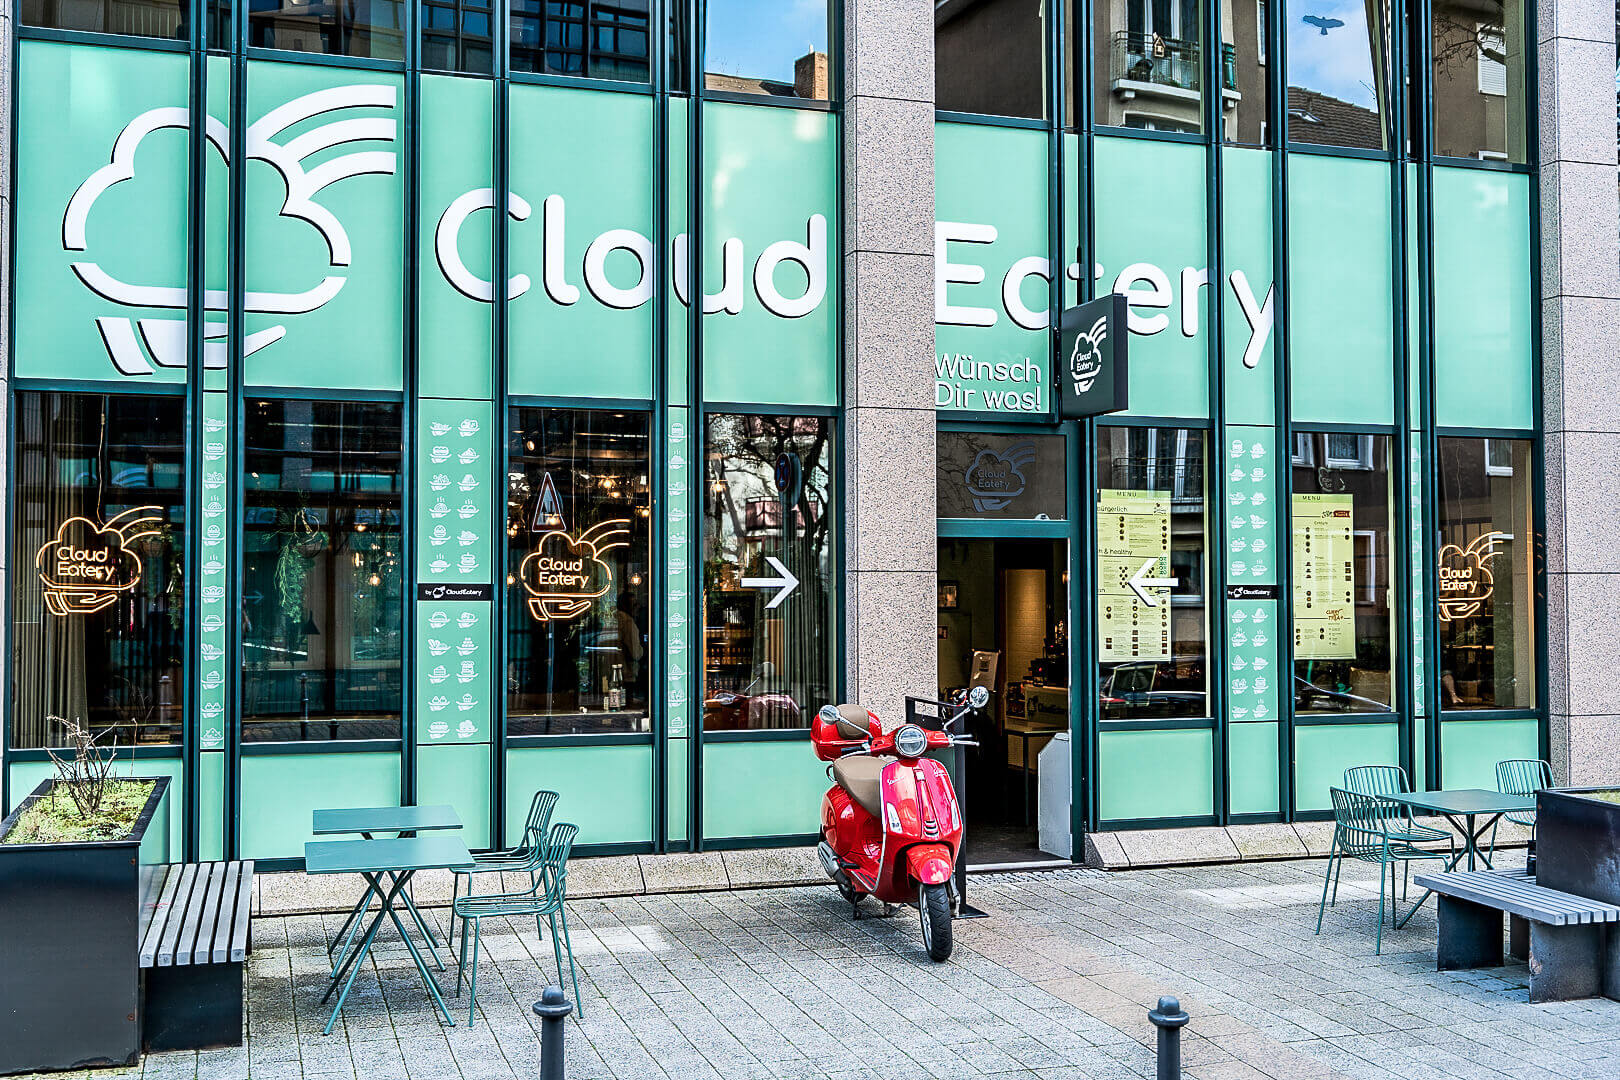 Exterior view of the CloudEatery in Frankfurt - finding a great location is a major hurdle when founding a food startup business 